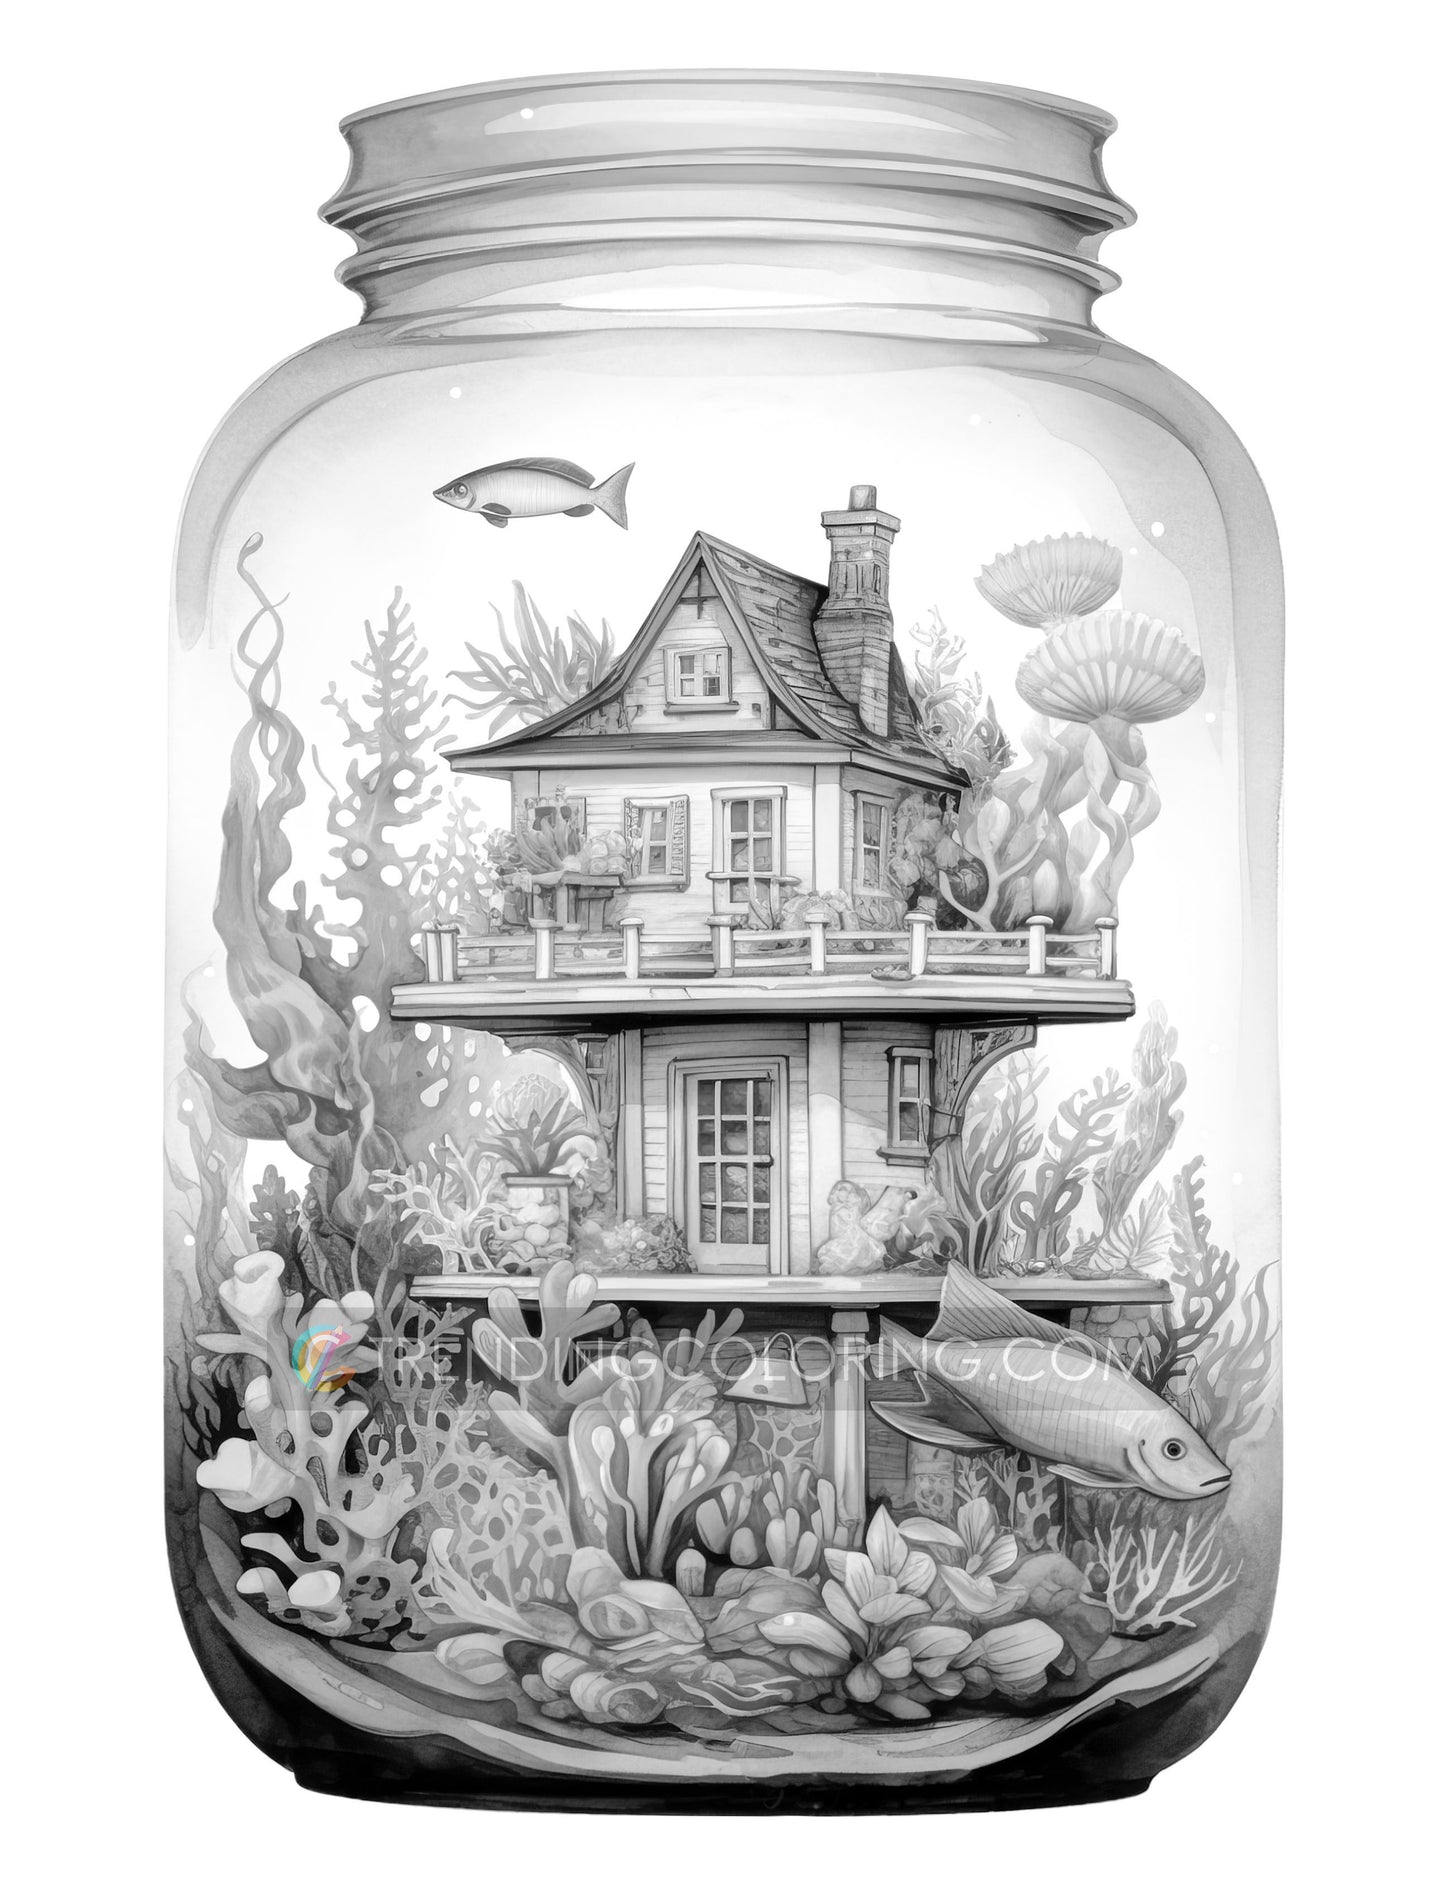 25 Fish House In Jar Grayscale Coloring Pages - Instant Download - Printable Dark/Light